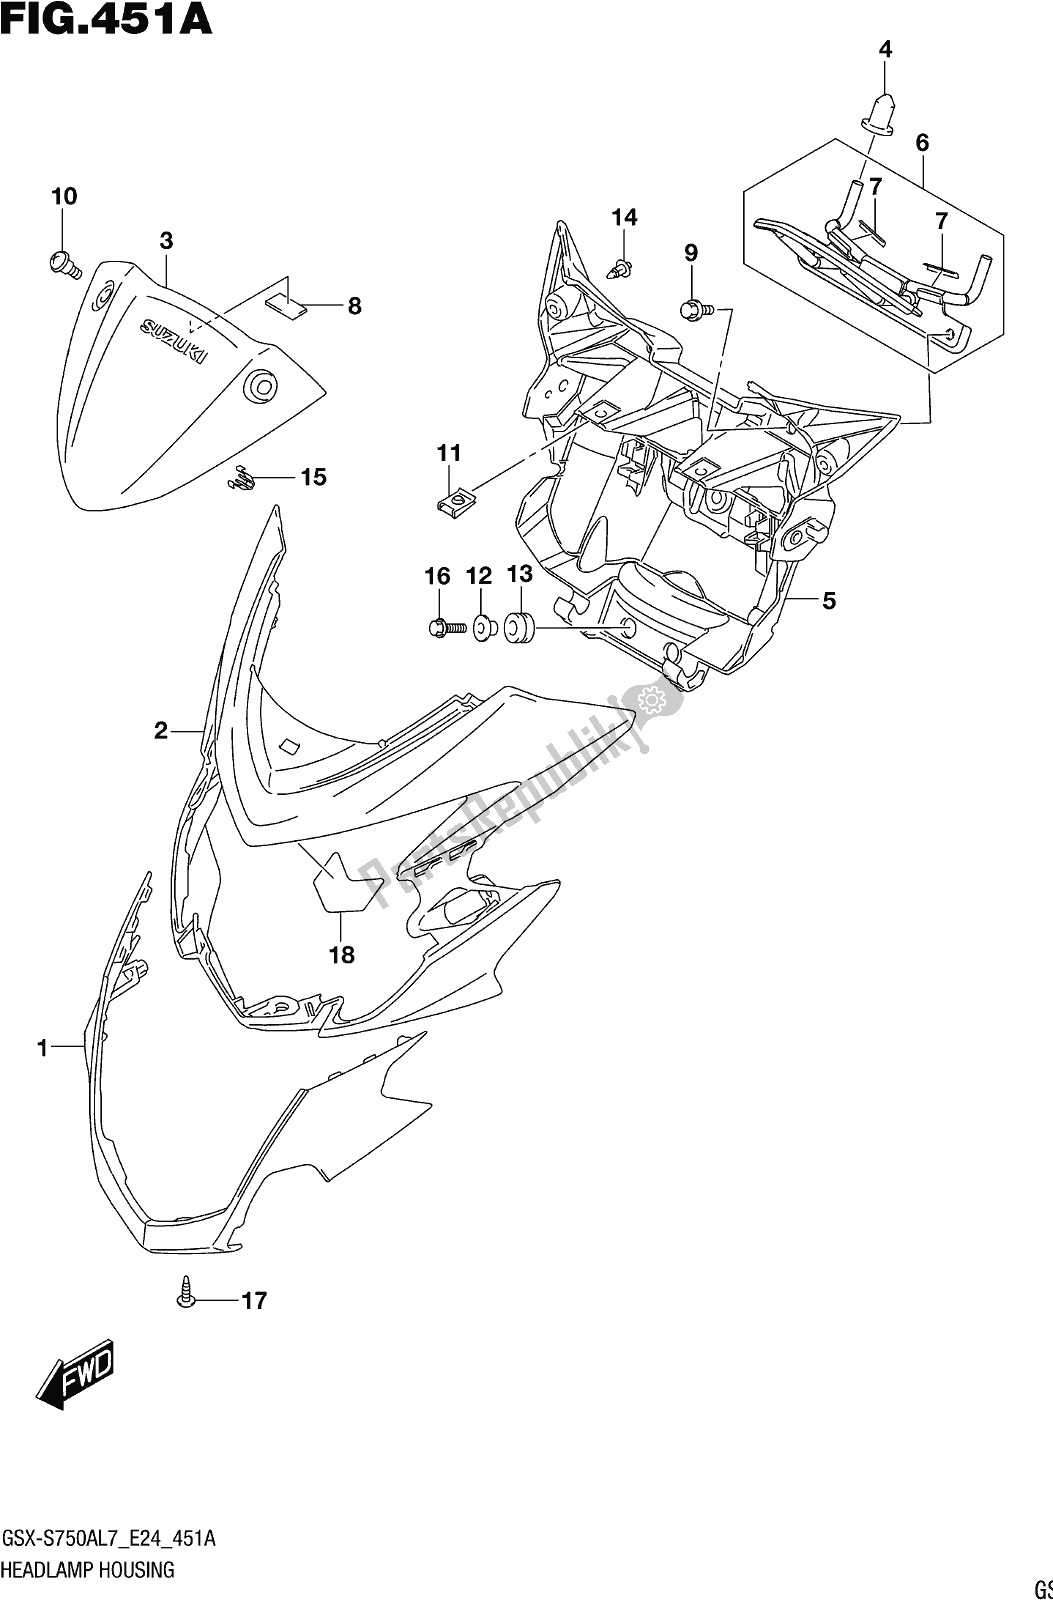 All parts for the Fig. 451a Headlamp Housing of the Suzuki Gsx-s 750 AZ 2017